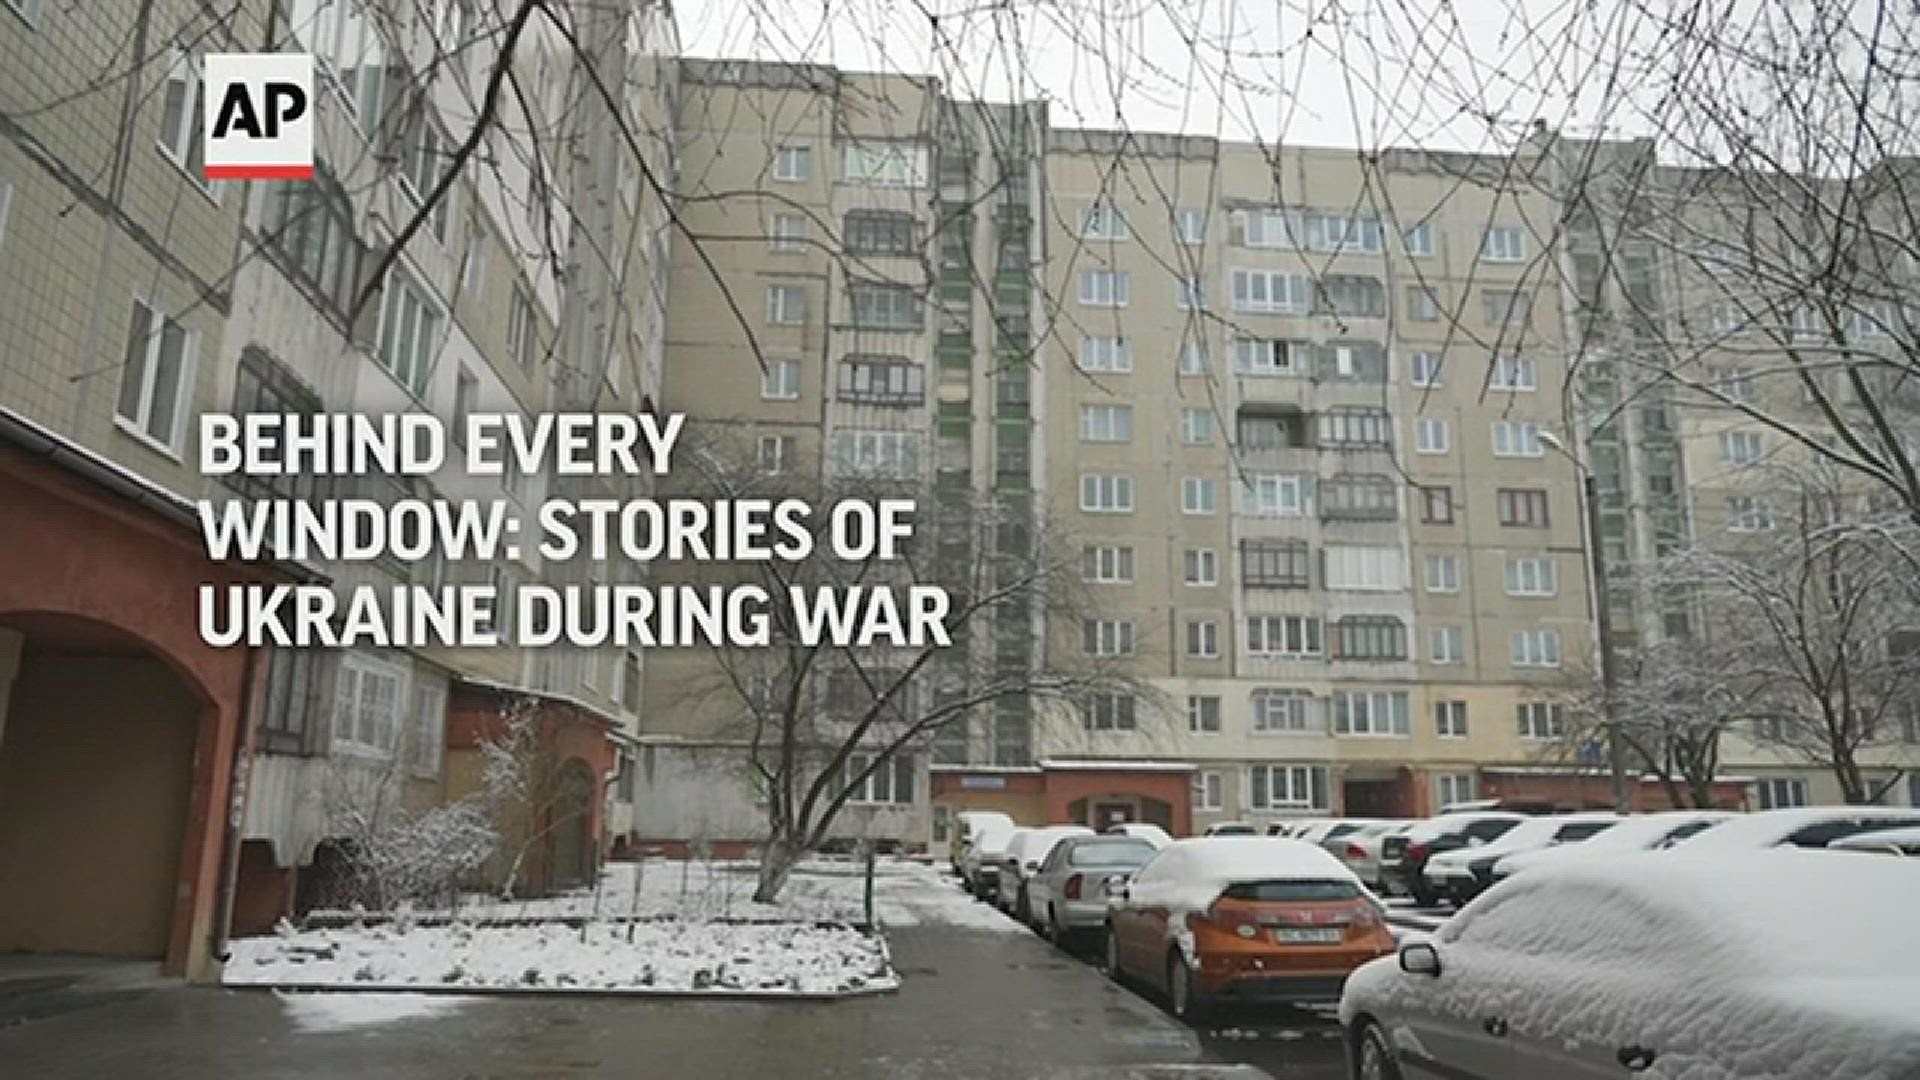 Within the walls of Soviet-era apartment blocks in Lviv, Ukraine, the residents have many stories to tell of the war with invading Russian forces.